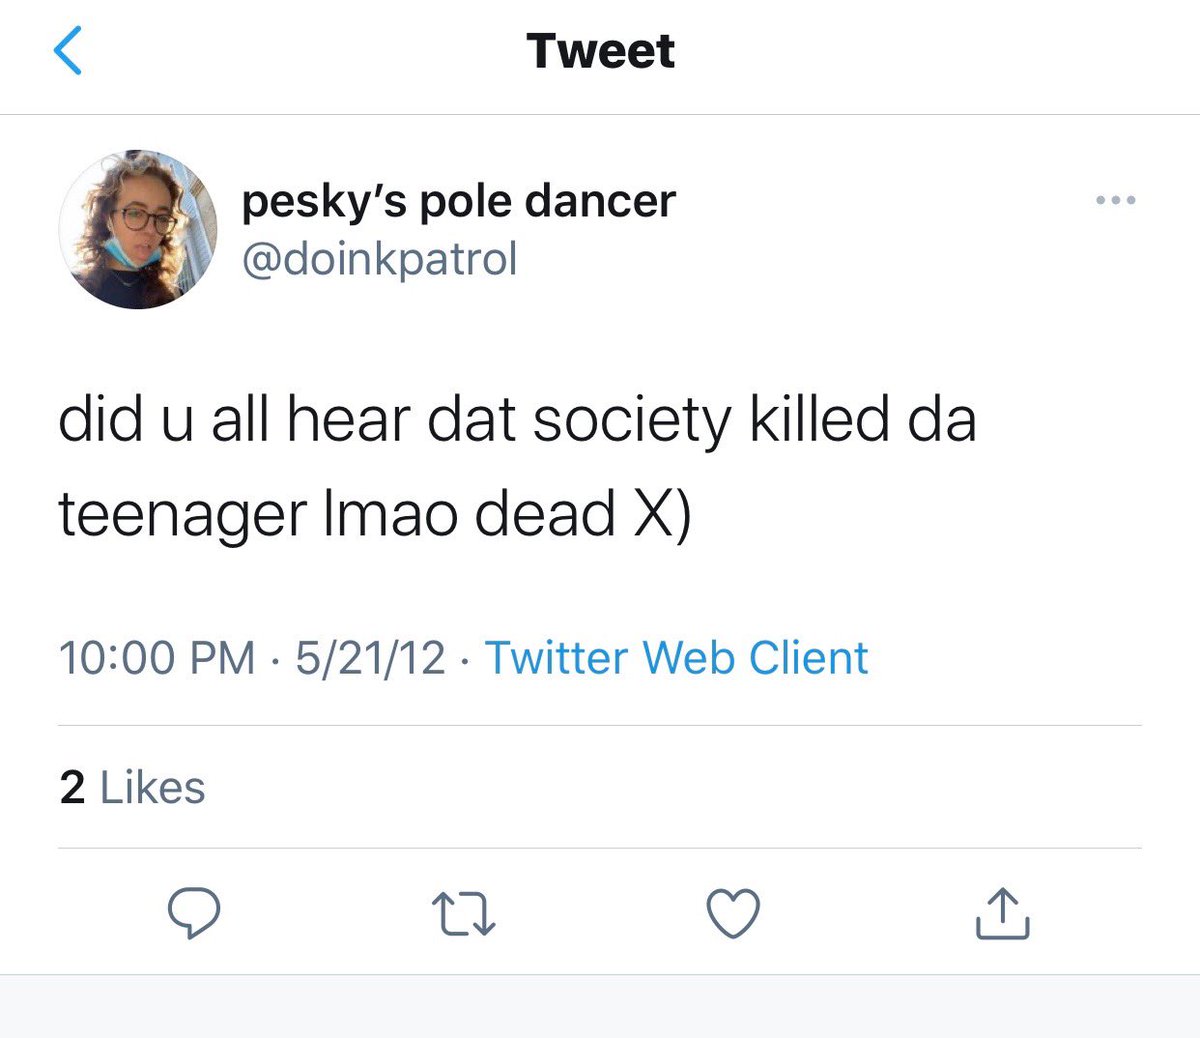 Wasn’t this around the time of the Trevon Martin/George Zimmerman shooting ma’am? I think that’s “da teenager” you were referring to?